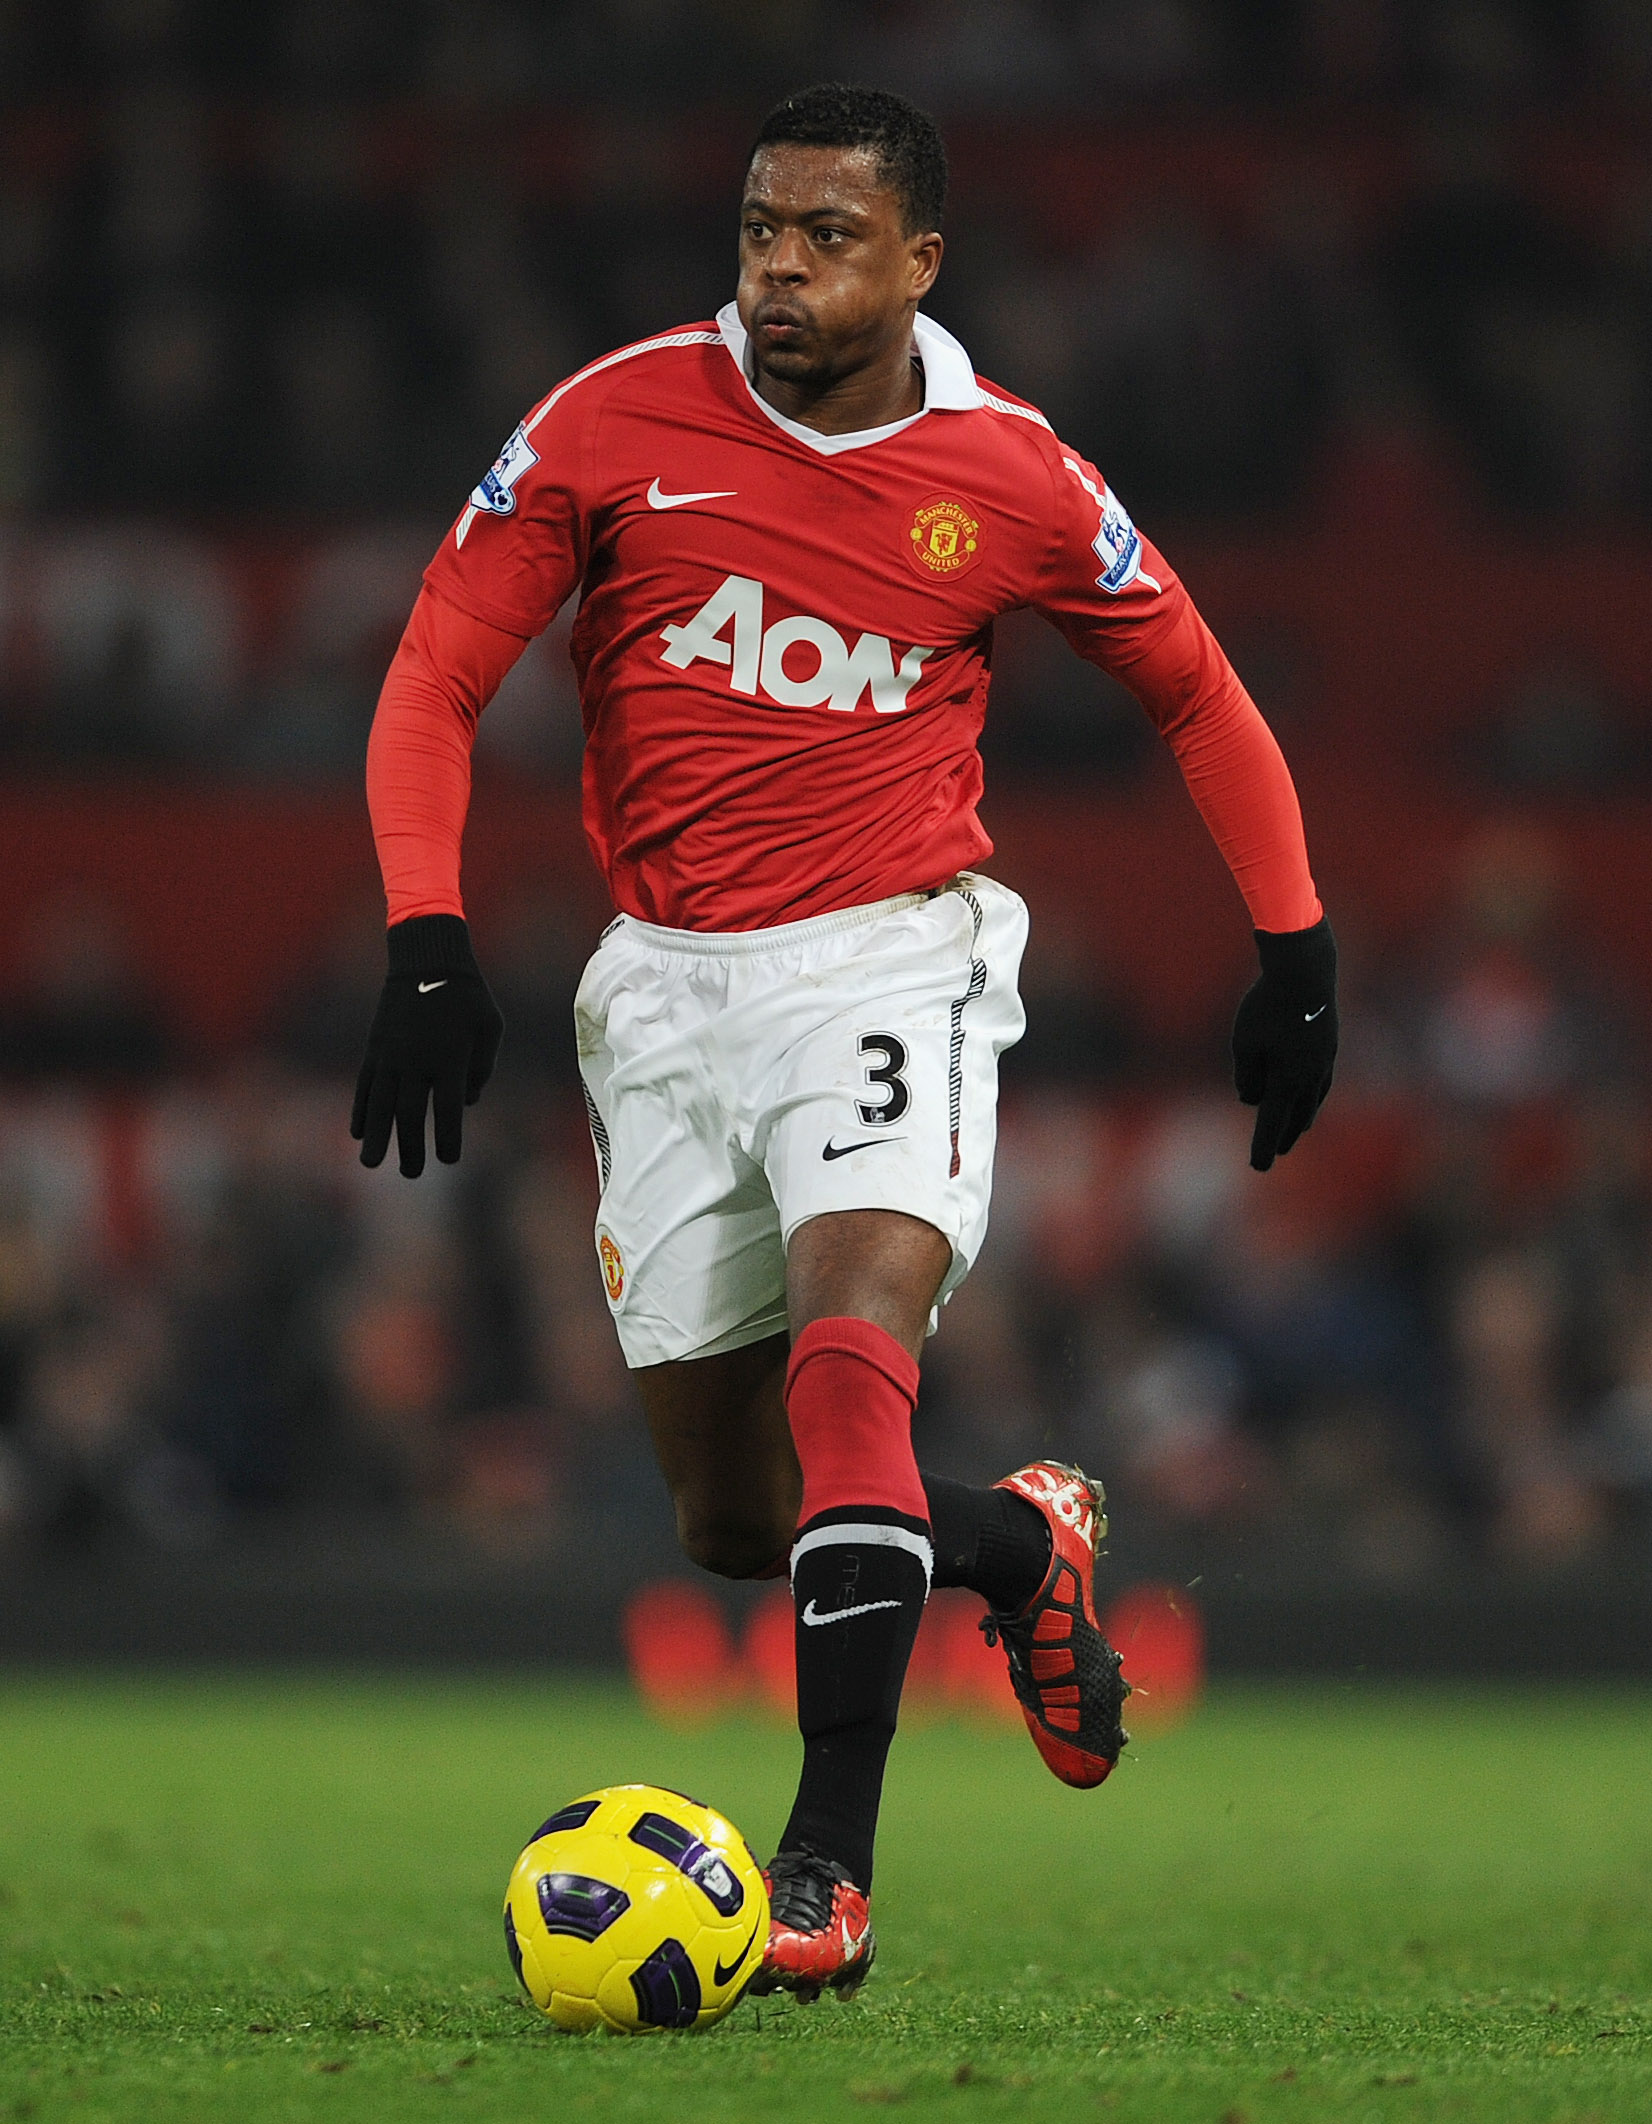 MANCHESTER, ENGLAND - NOVEMBER 20:  Patrice Evra of Manchester United plays the ball during the Barclays Premier League match between Manchester United and Wigan Athletic at Old Trafford on November 20, 2010 in Manchester, England.  (Photo by Michael Rega